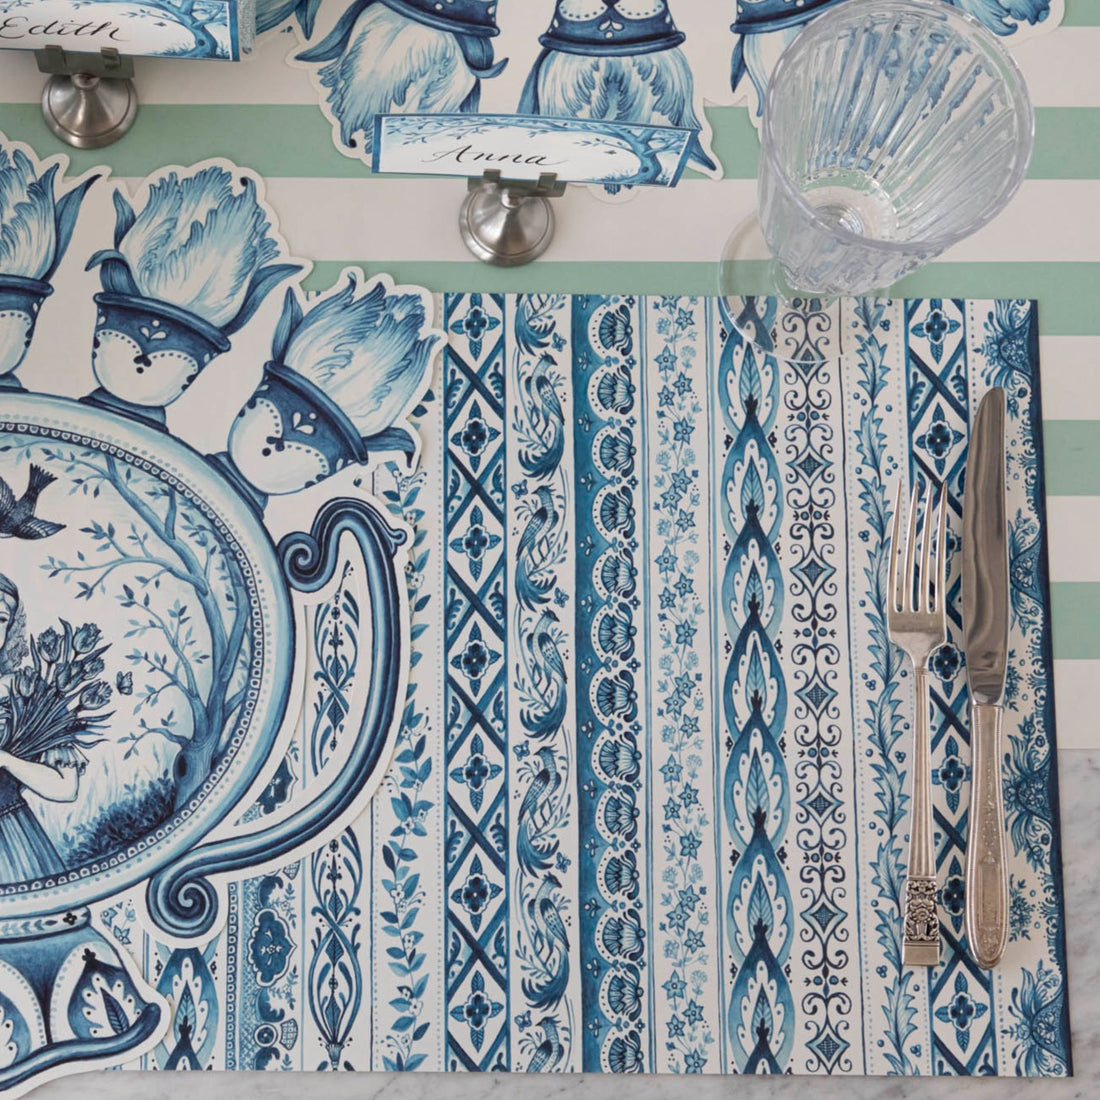 A table setting with beautiful Indigo Chintz placemats by Hester &amp; Cook.